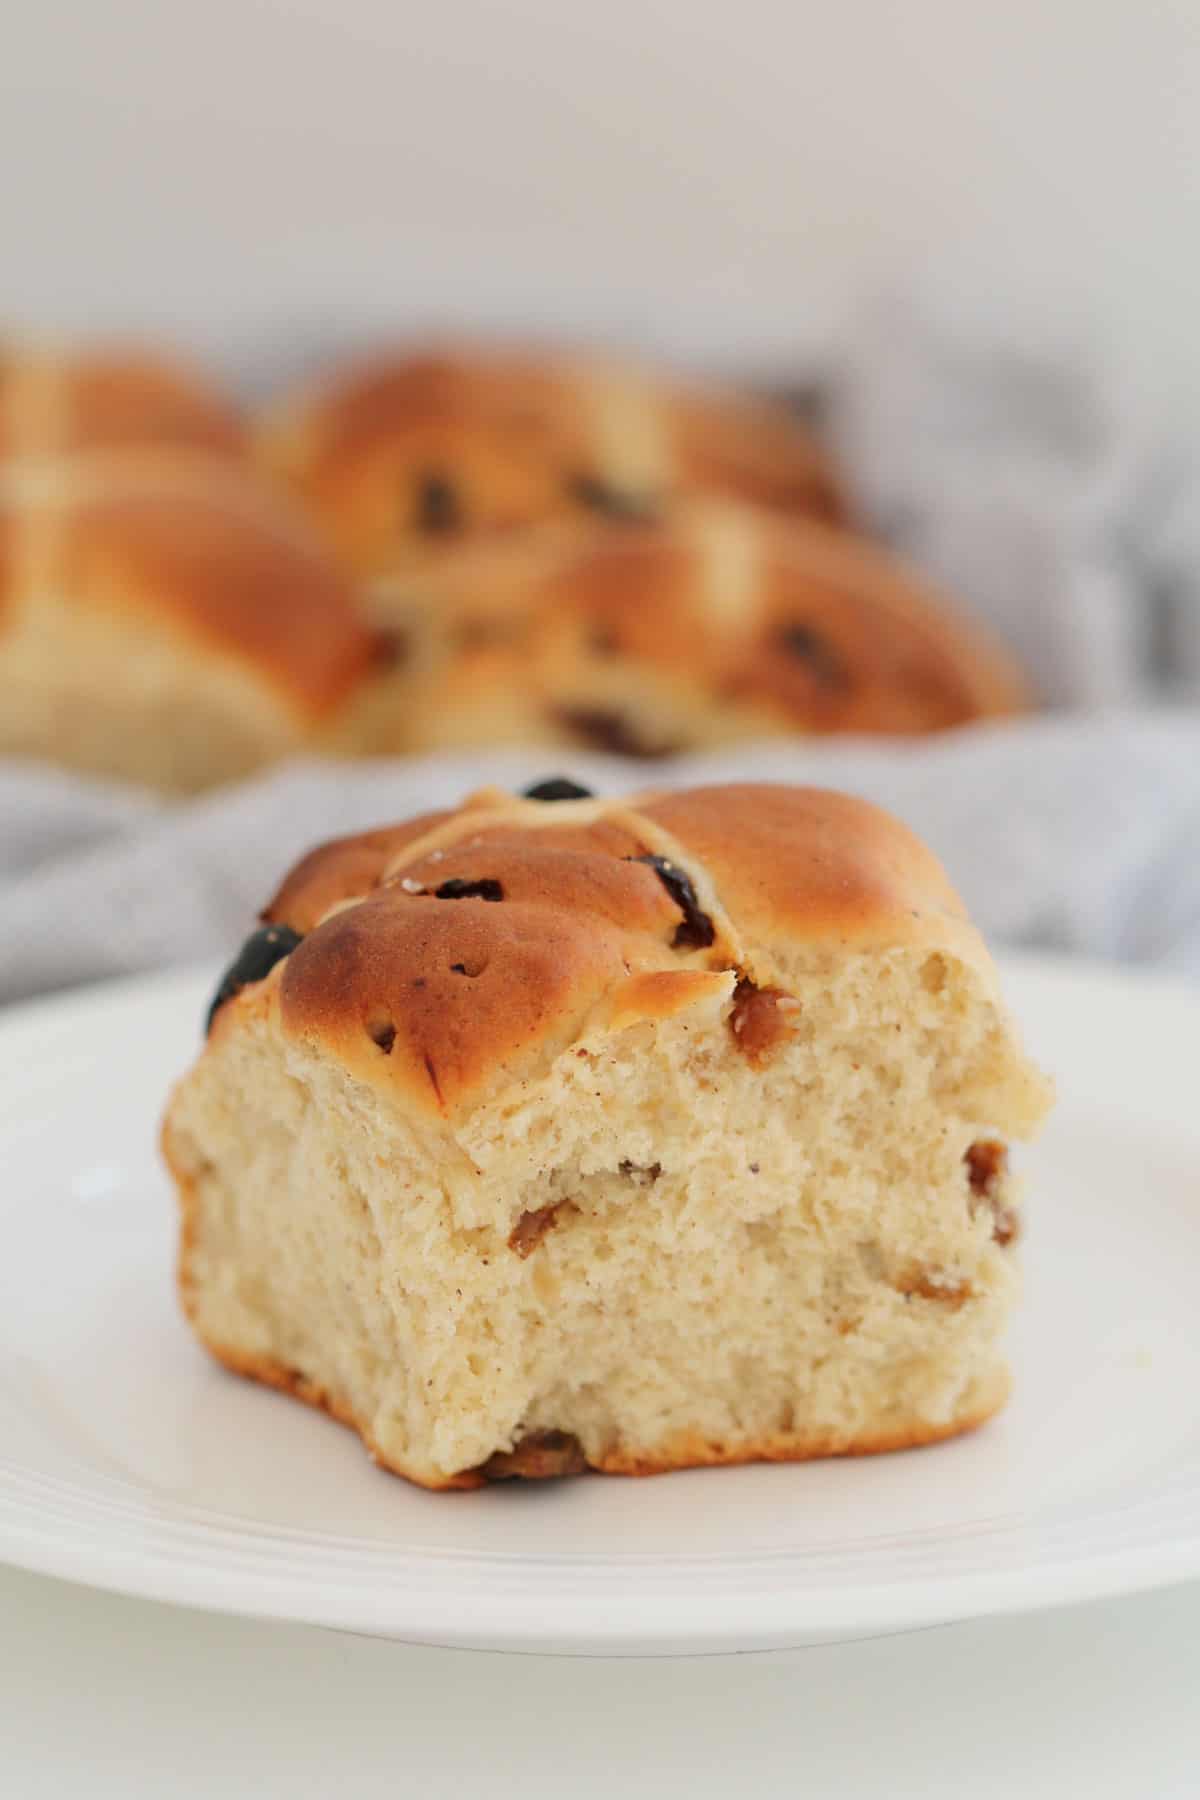 A fluffy fruit hot cross bun spied with cinnamon and nutmeg on a white plate.